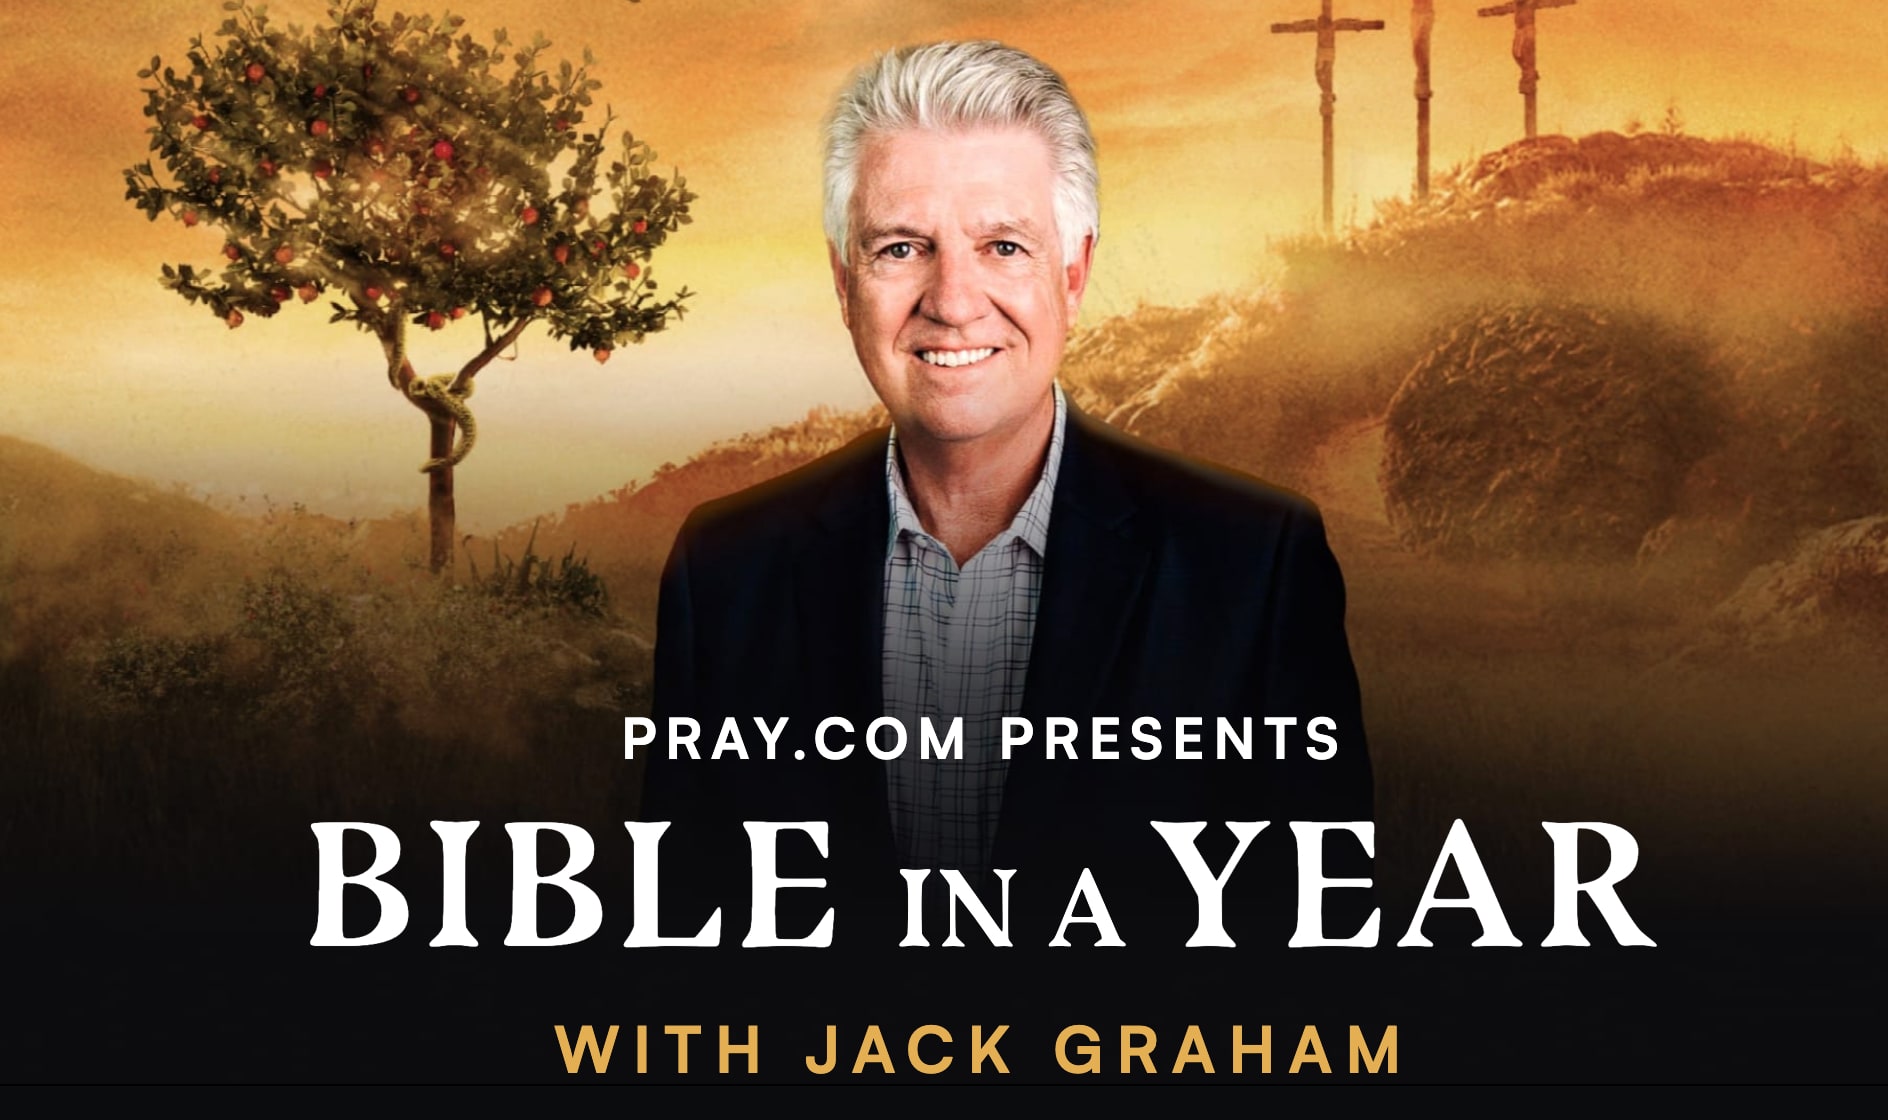 “Bible in a Year Podcast with Jack Graham” daily series launched in October and reached No. 1 on the Spotify religion list in the first week.